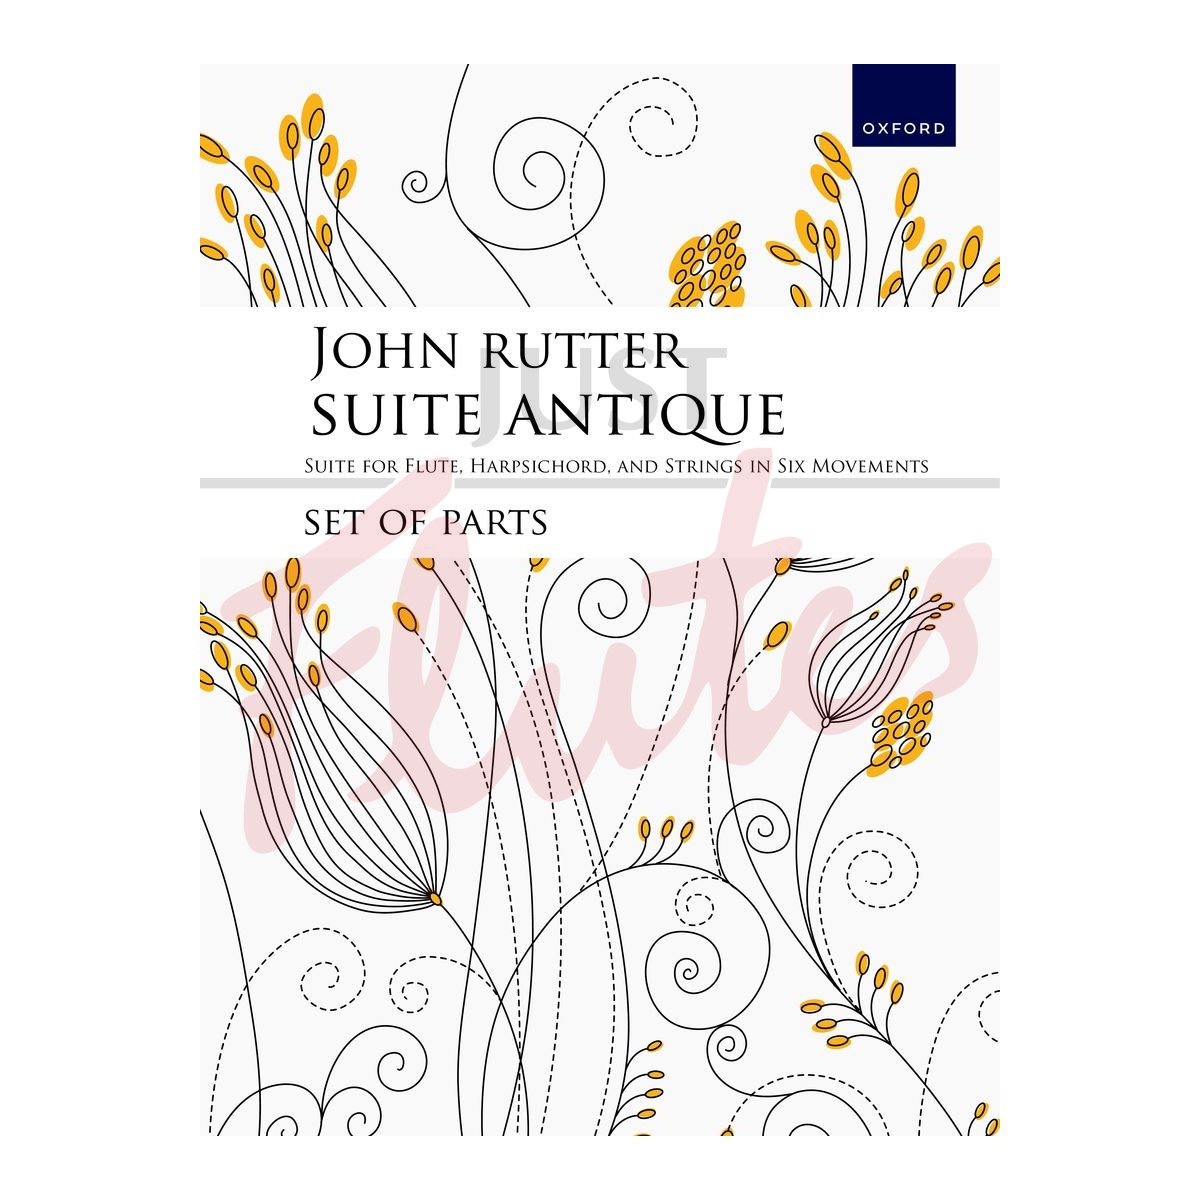 Suite Antique for Flute, Harpsichord and Strings